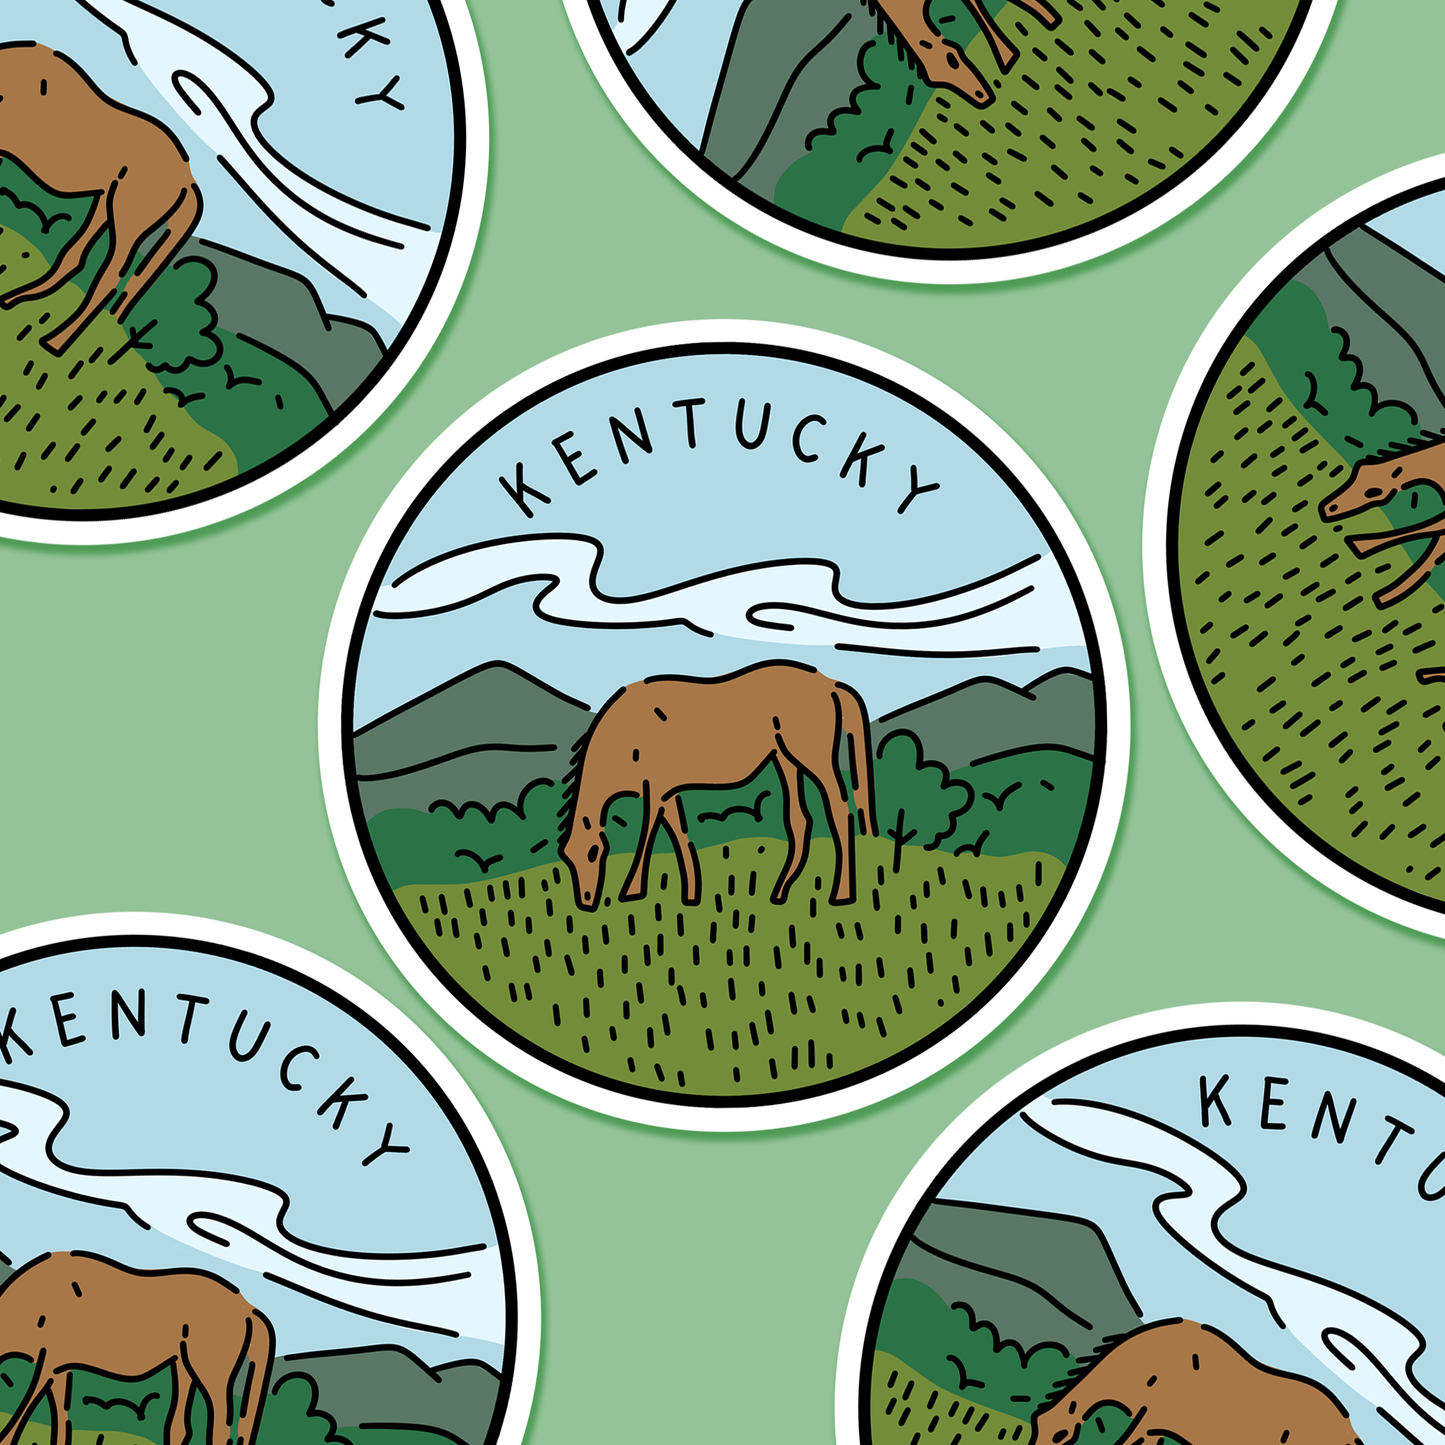 Kentucky Illustrated US State 3 x 3 in - Travel Sticker